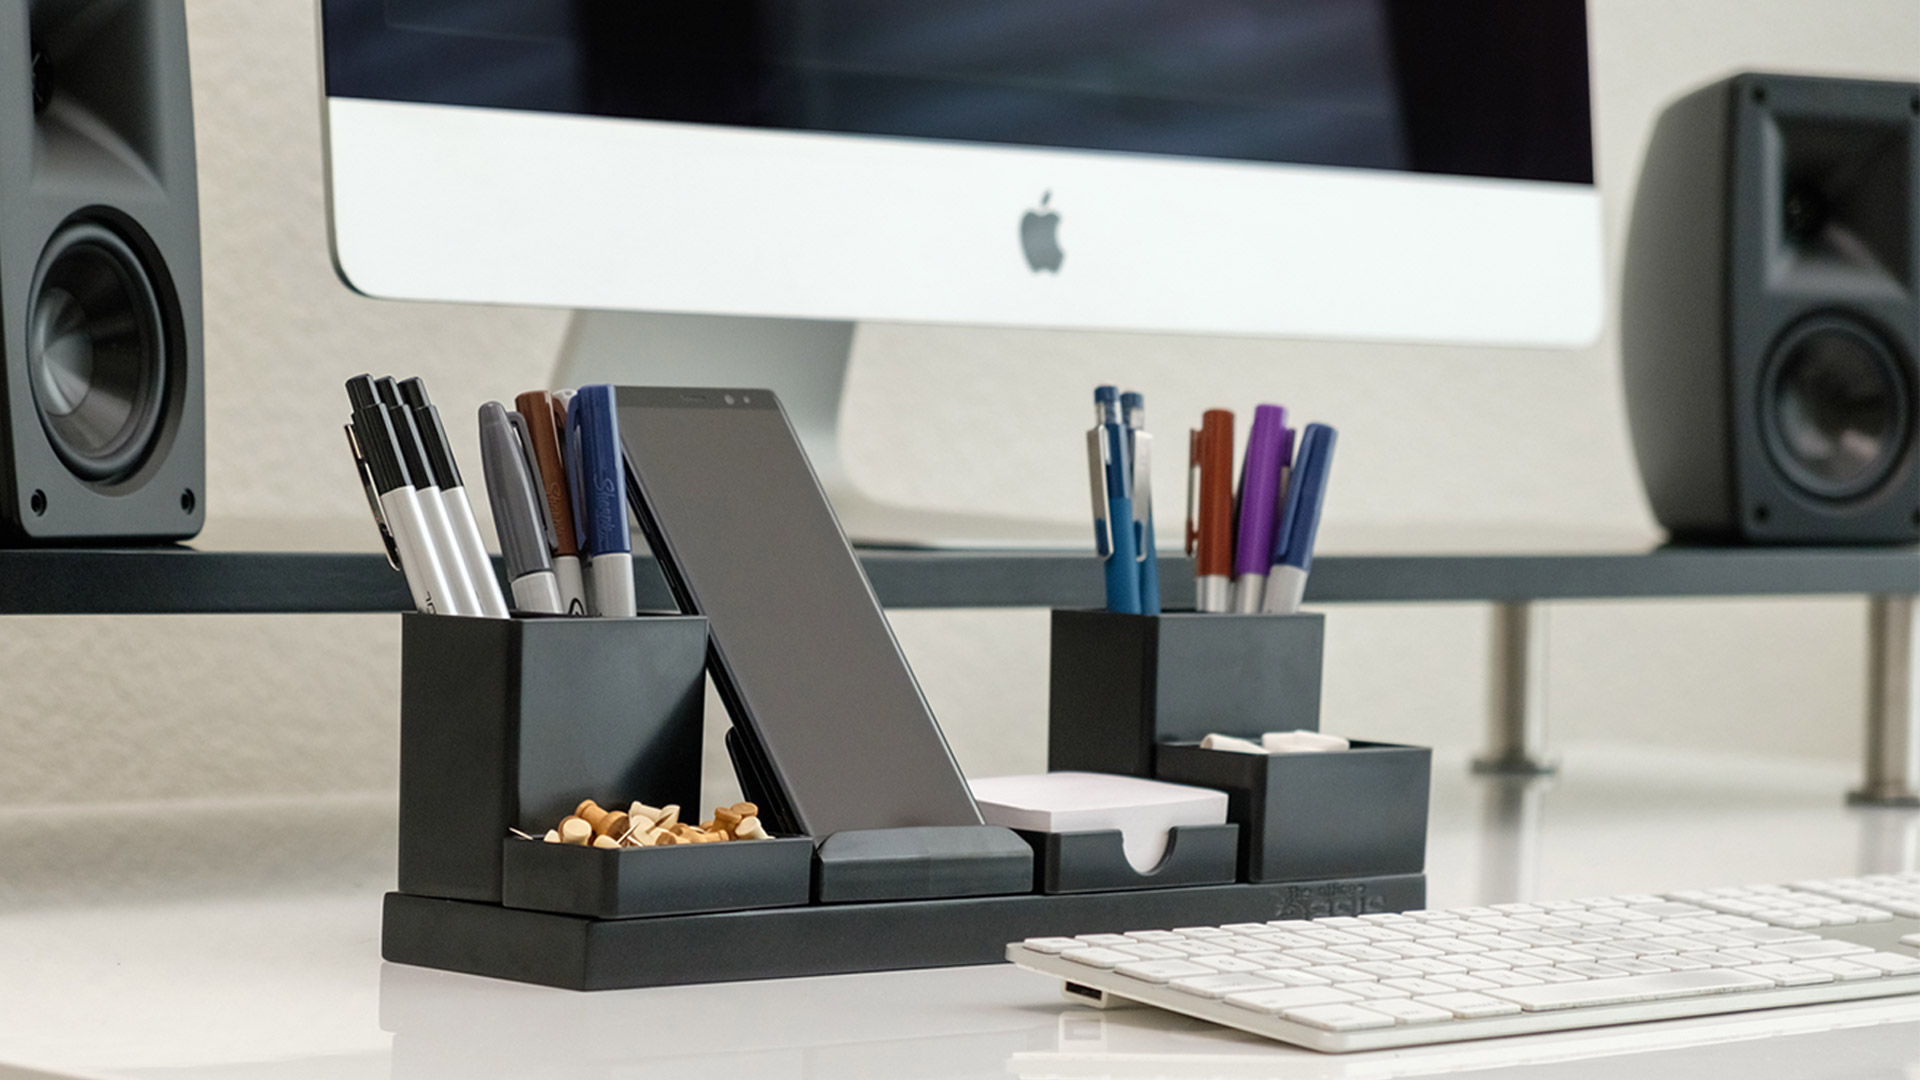 The Magnetic Desk Organizer That Keeps Your Focused.